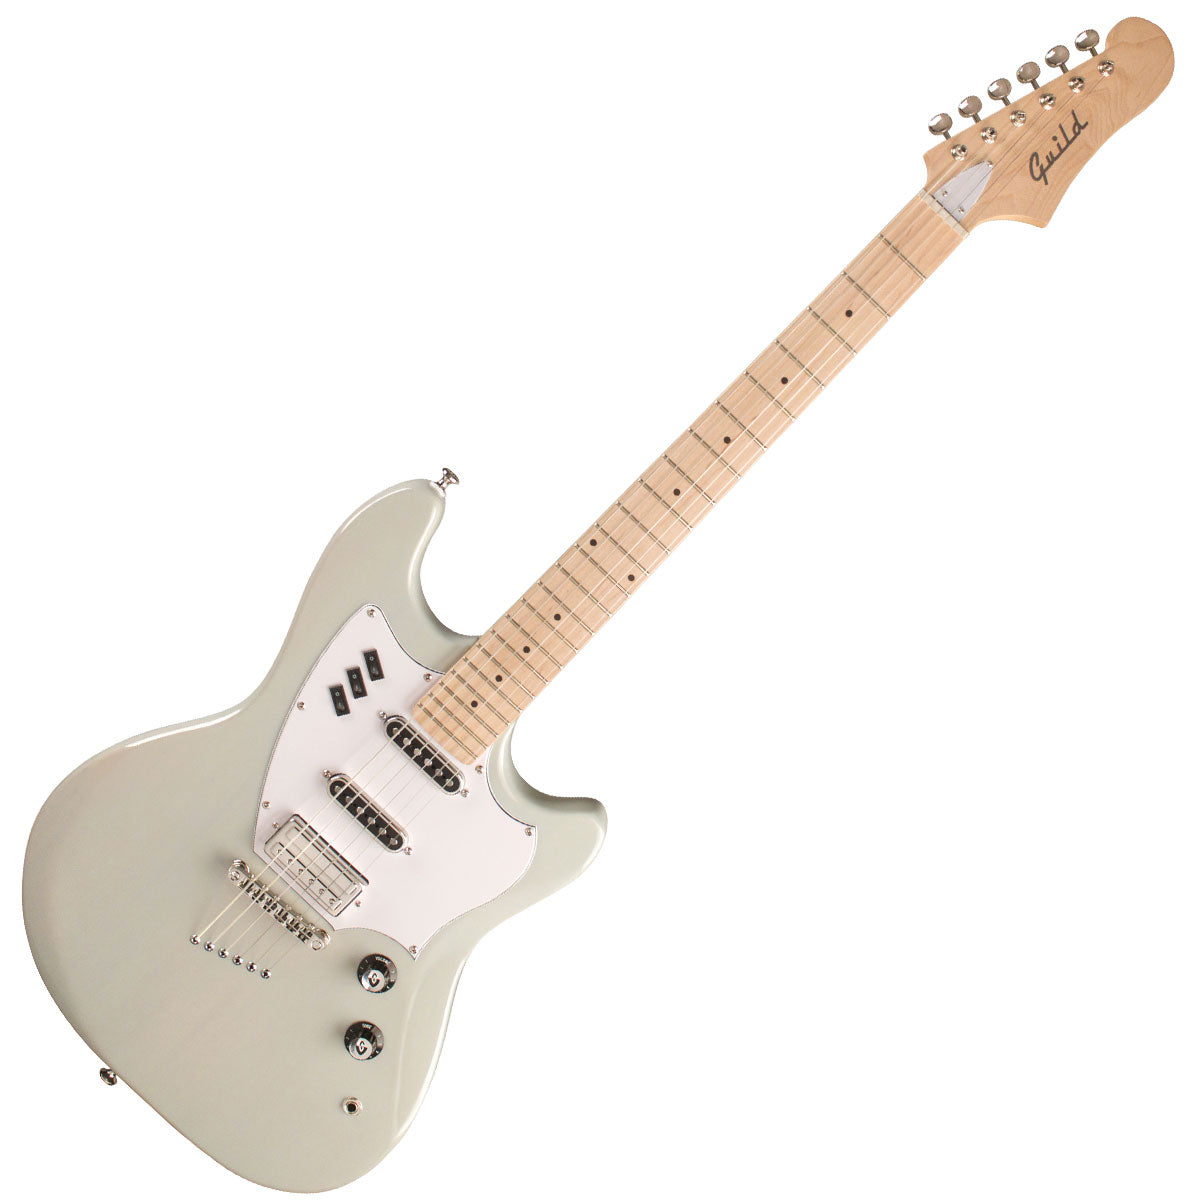 Guild Surfliner Solid Body Electric Guitar with Maple Fretboard - White Sage